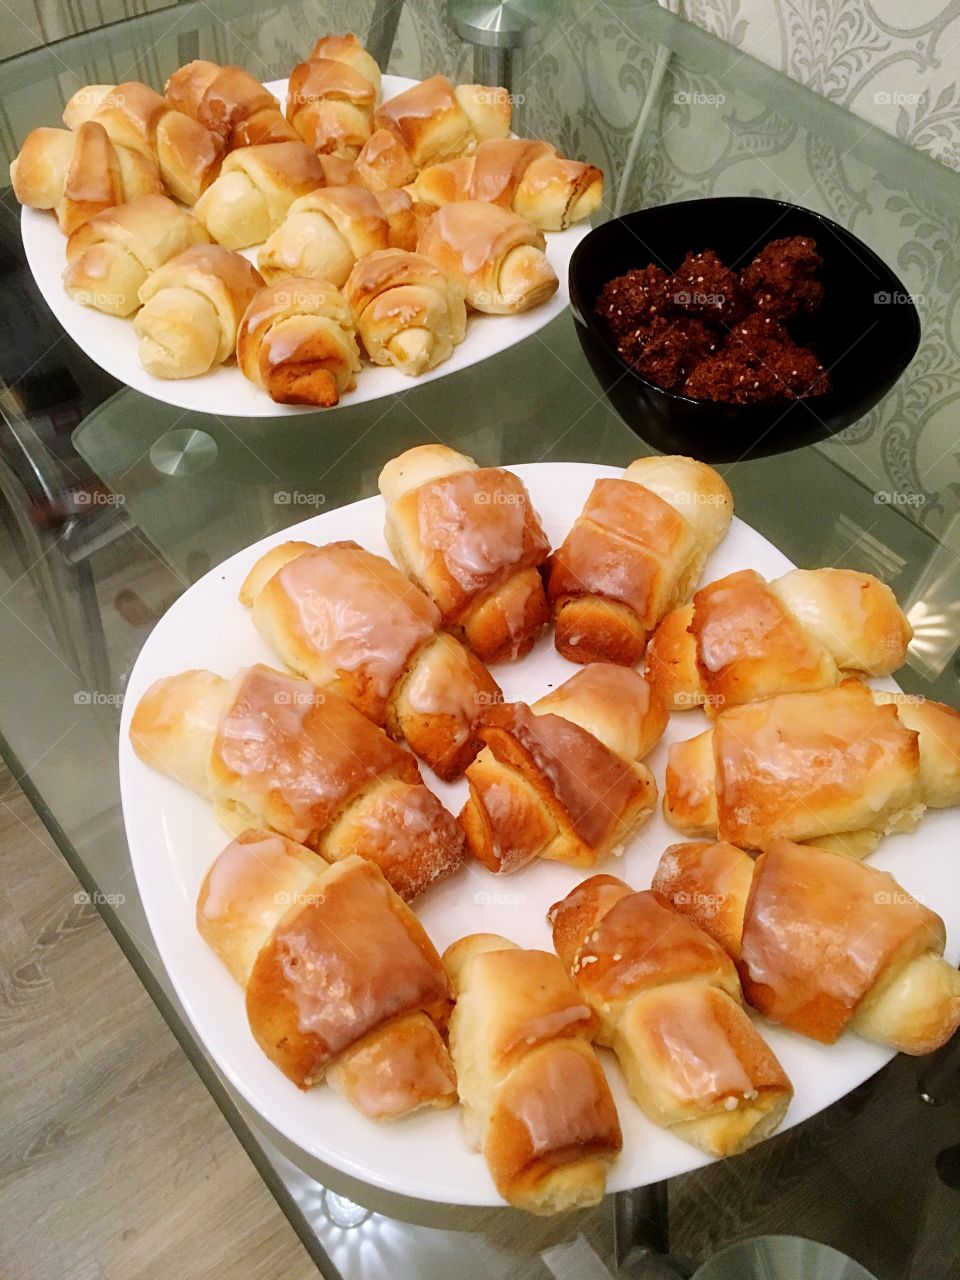 delicious homemade pastries